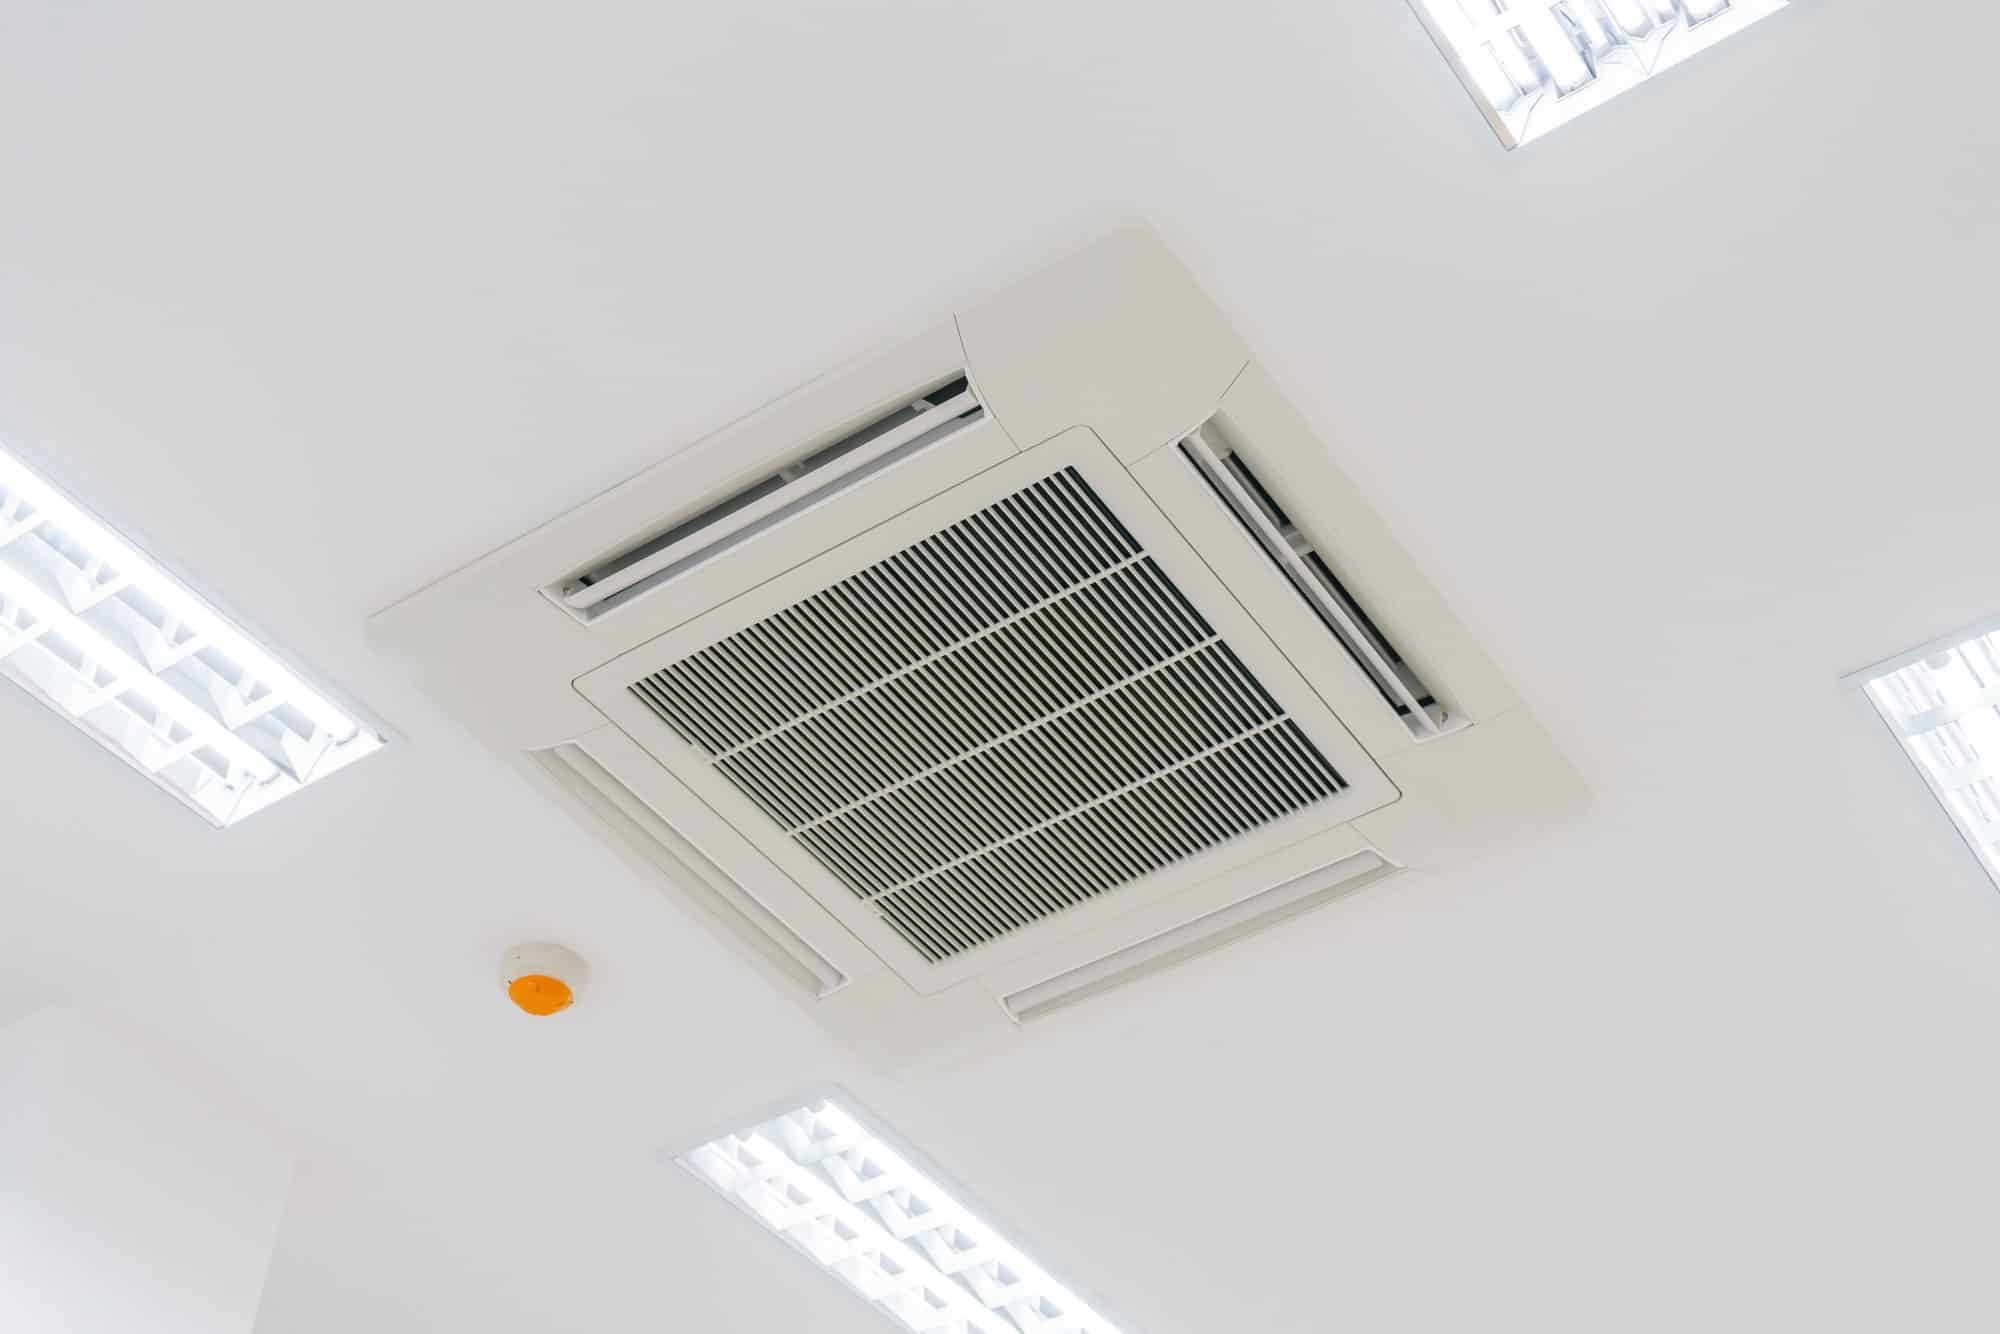 Office air conditioning system on ceiling with 4 lights surrounding it